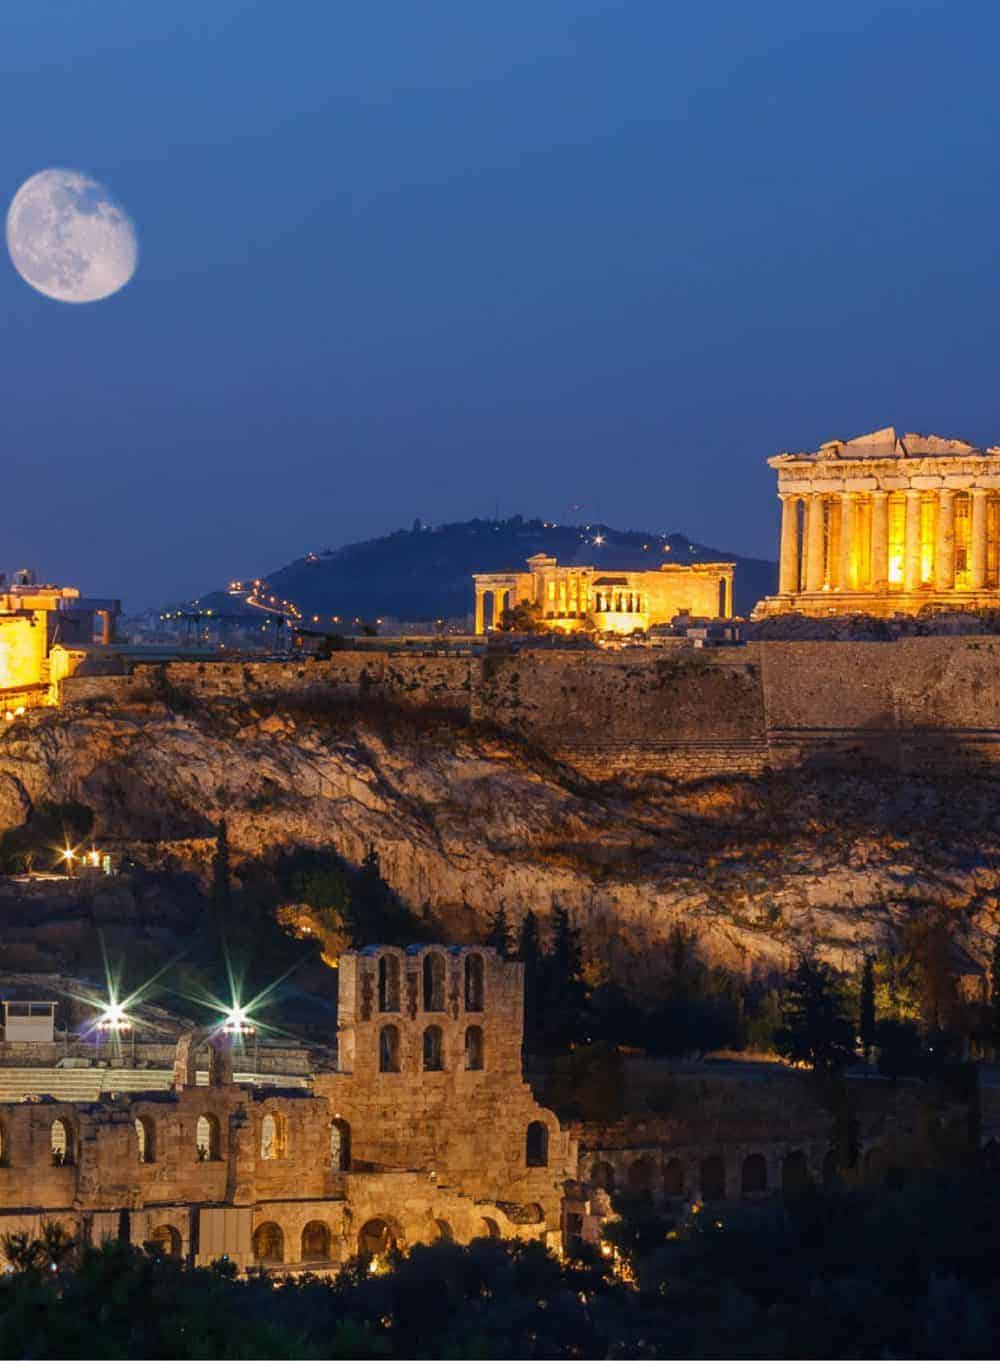 Acropolis in Athens during night